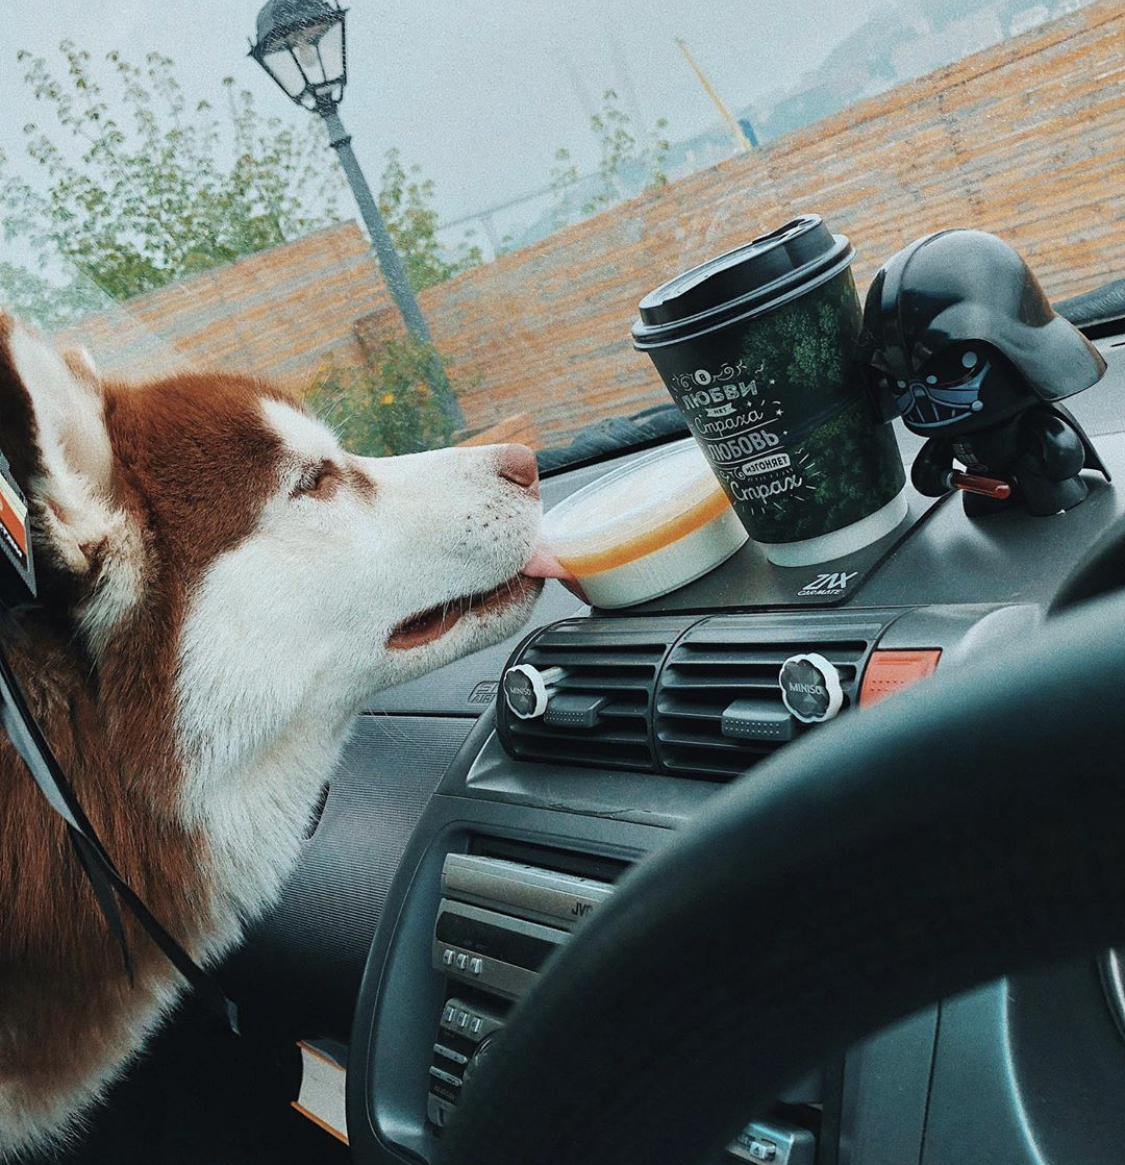 A Husky licking the plastic container on top of the dashboard inside the car